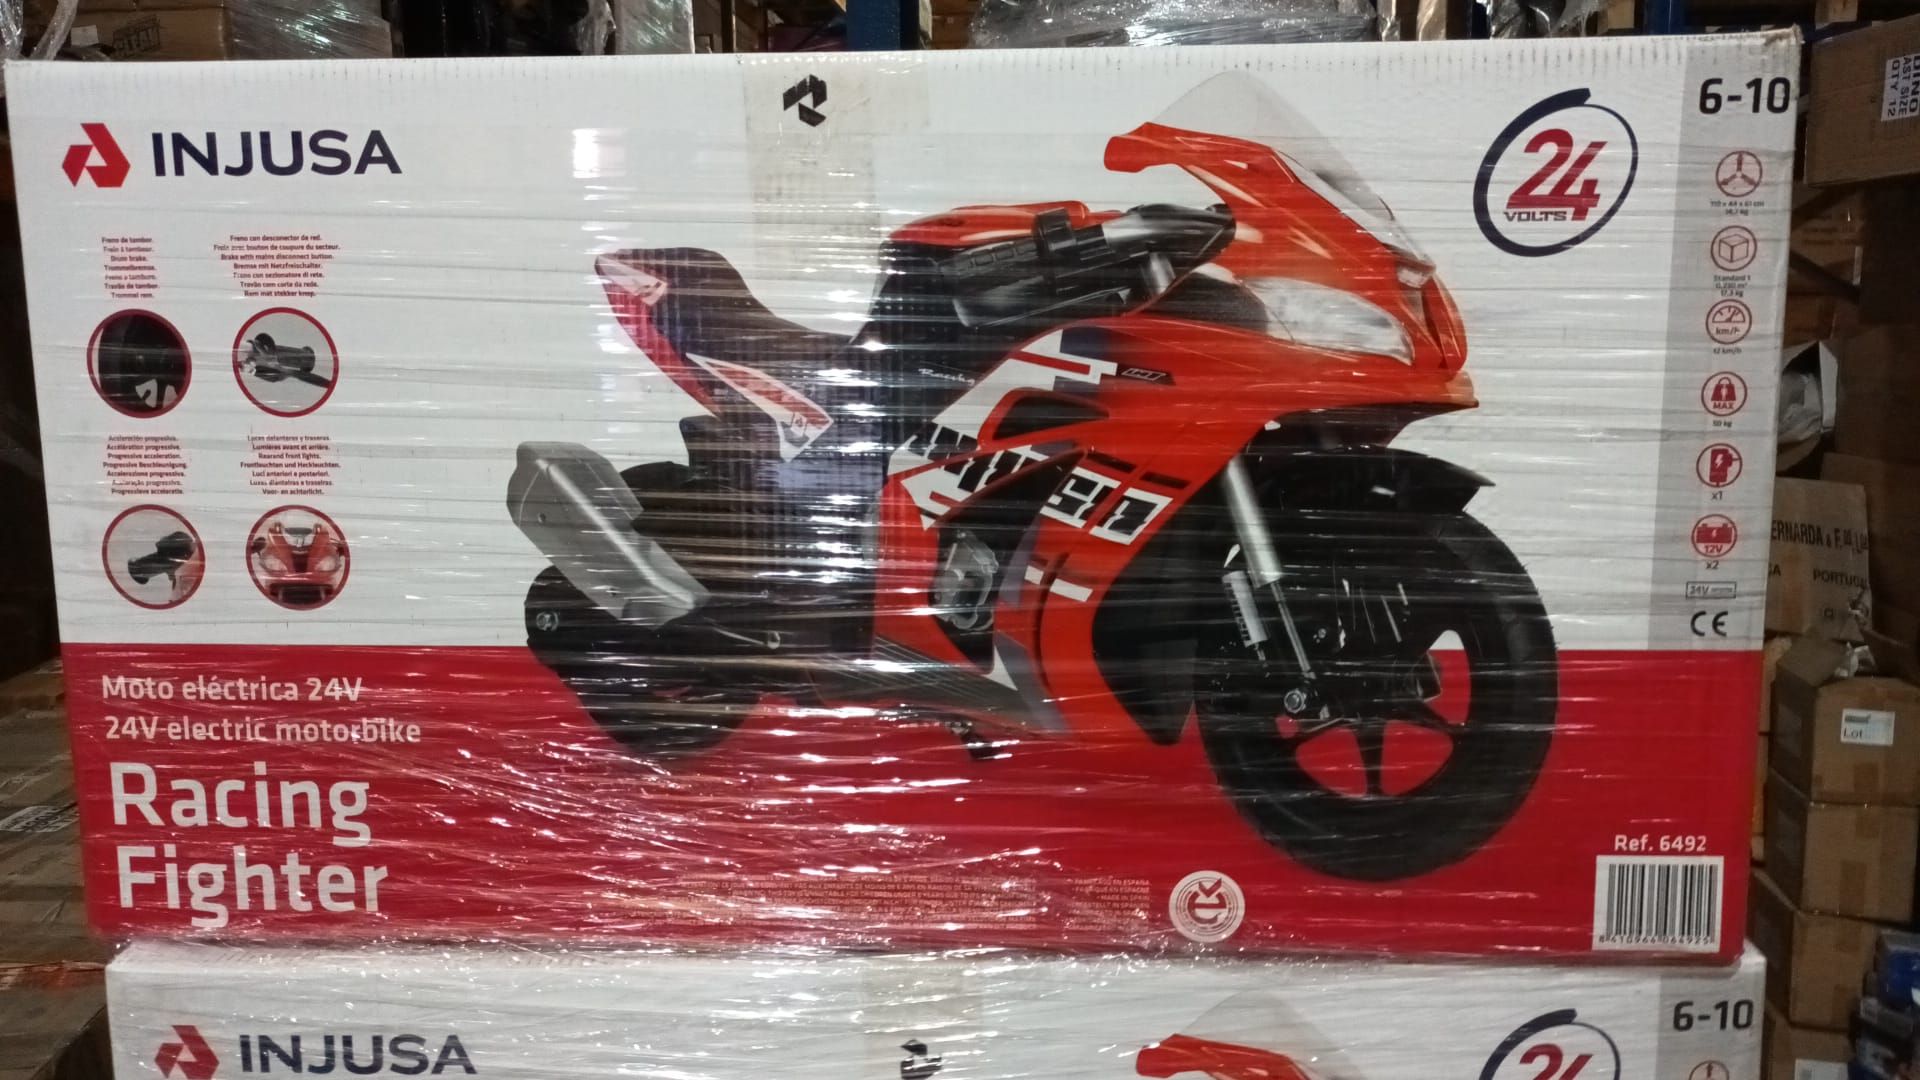 NEW BOXED INJUSA - Motorcycle Racing Fighter 24V with Drum Brake, Progressive Acceleration and